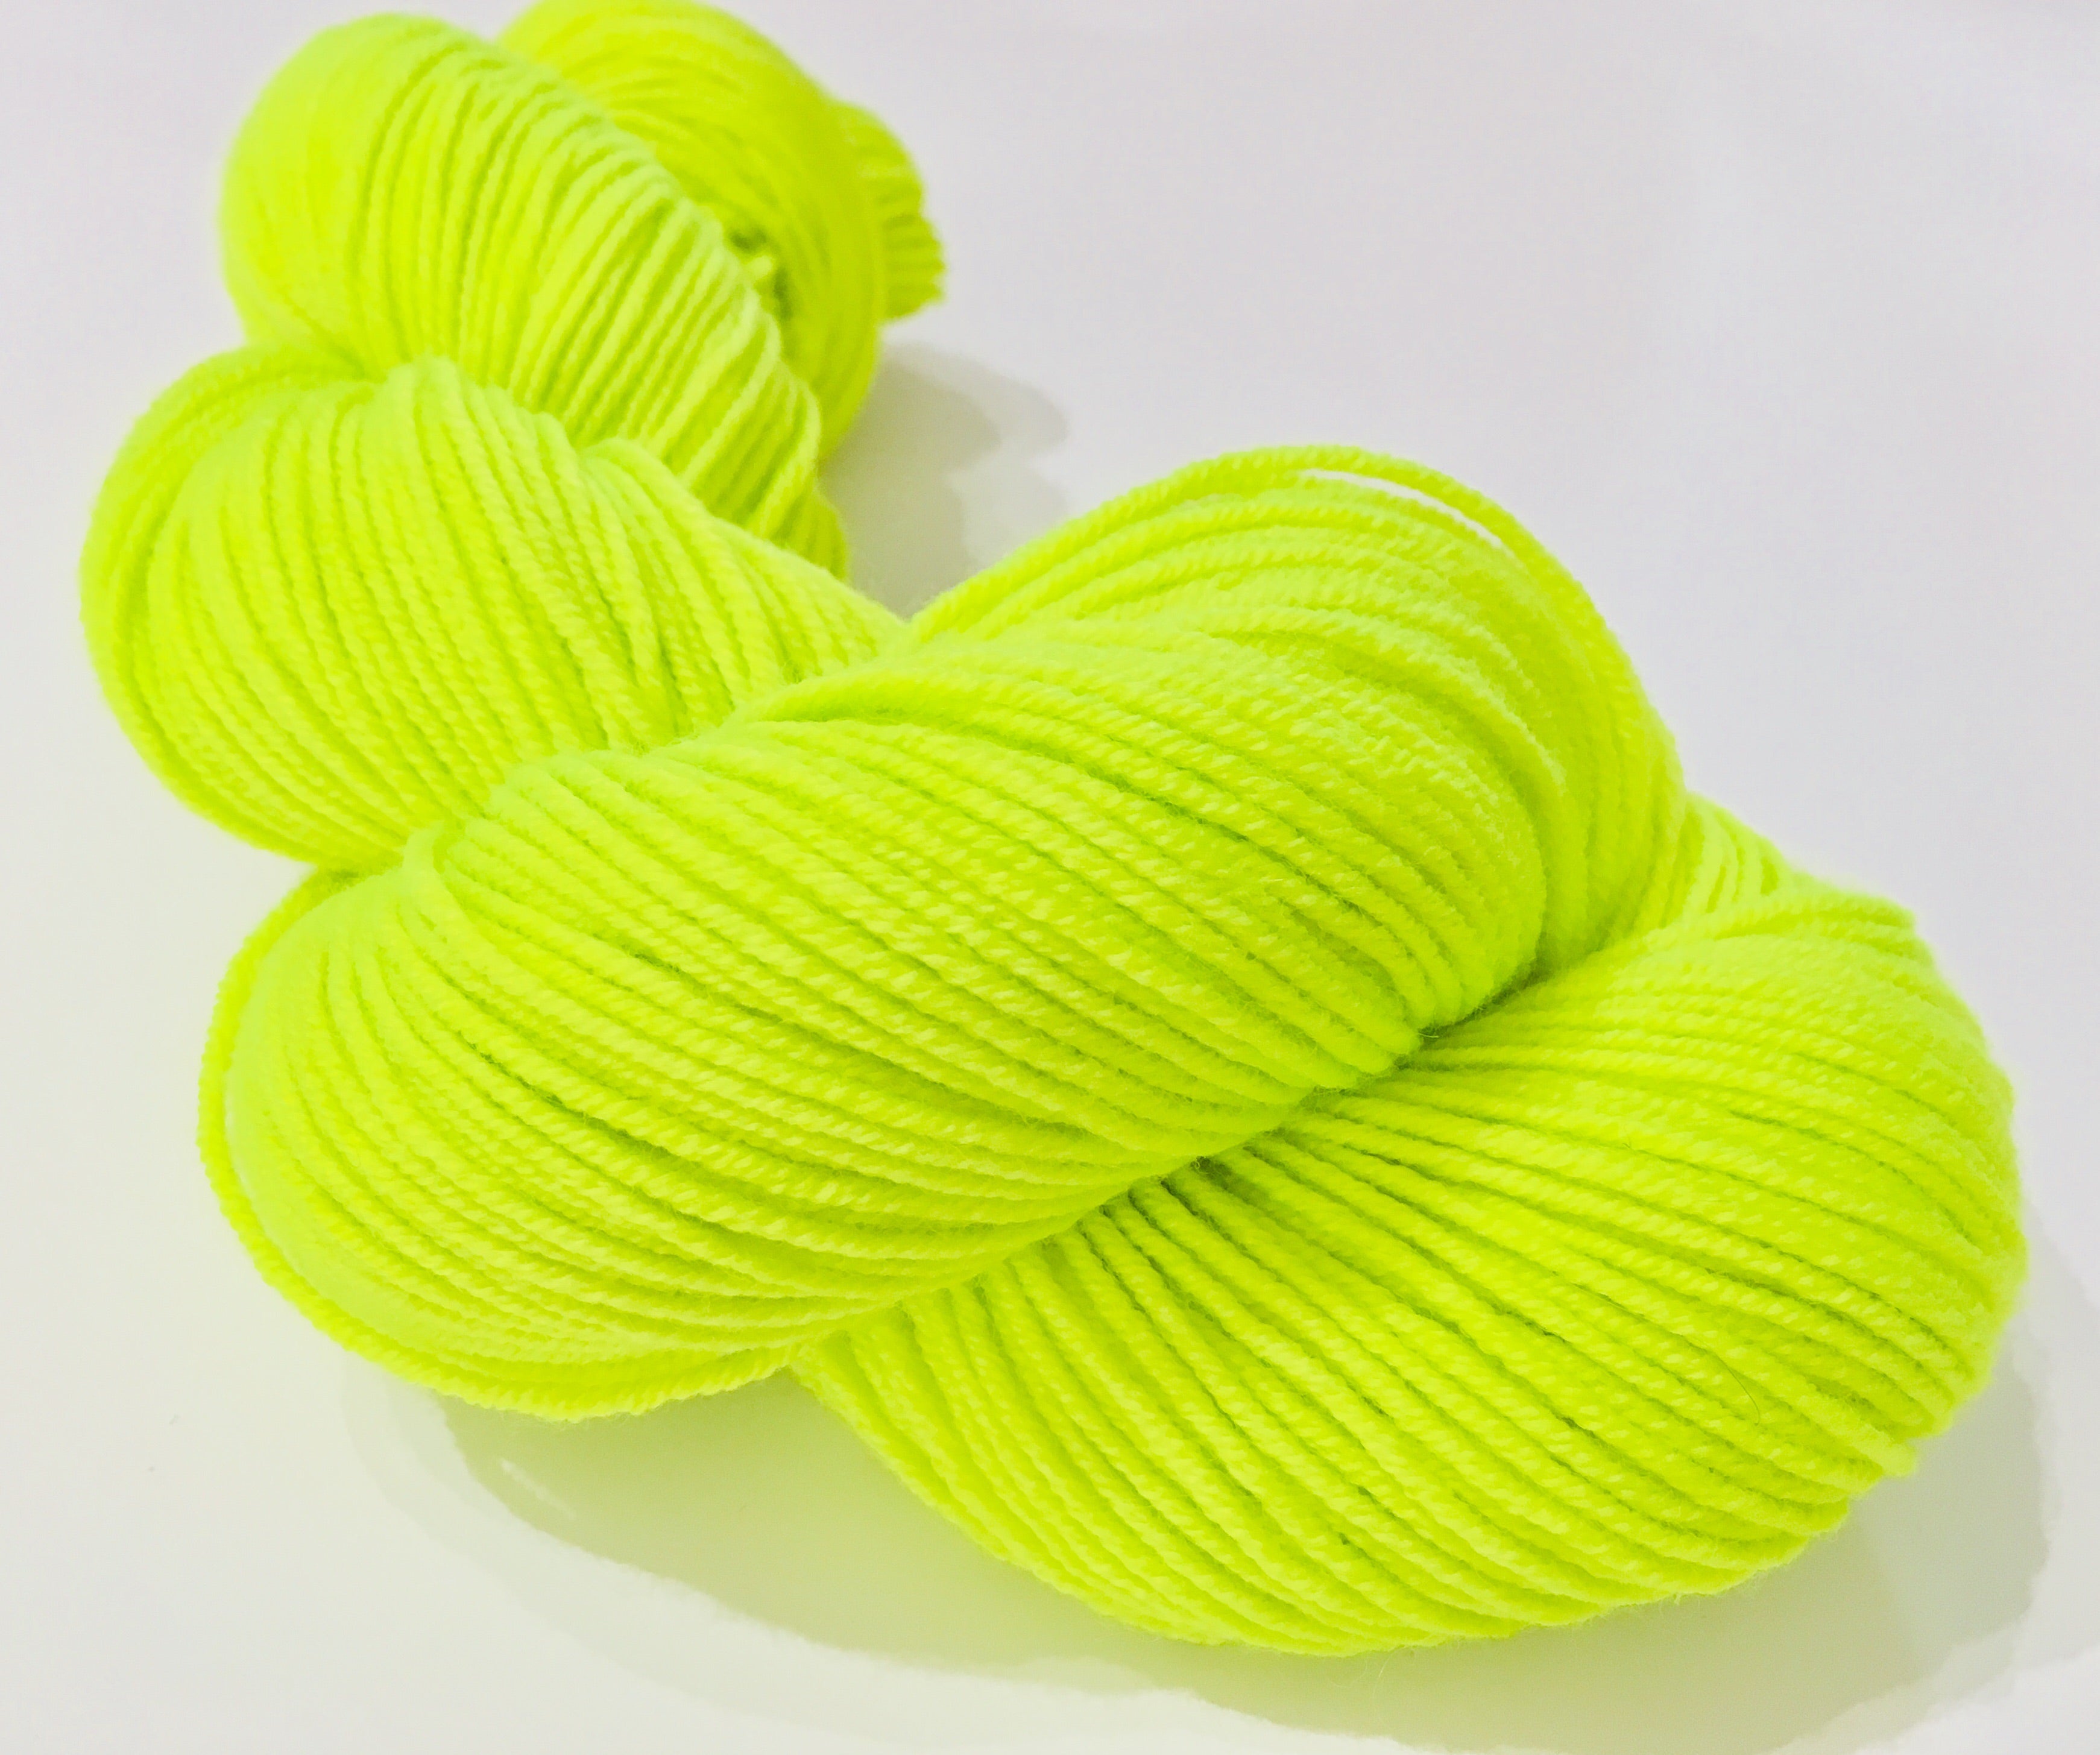 fluorescent neon yarn skein in highlighter yellow green for knitting and crochet